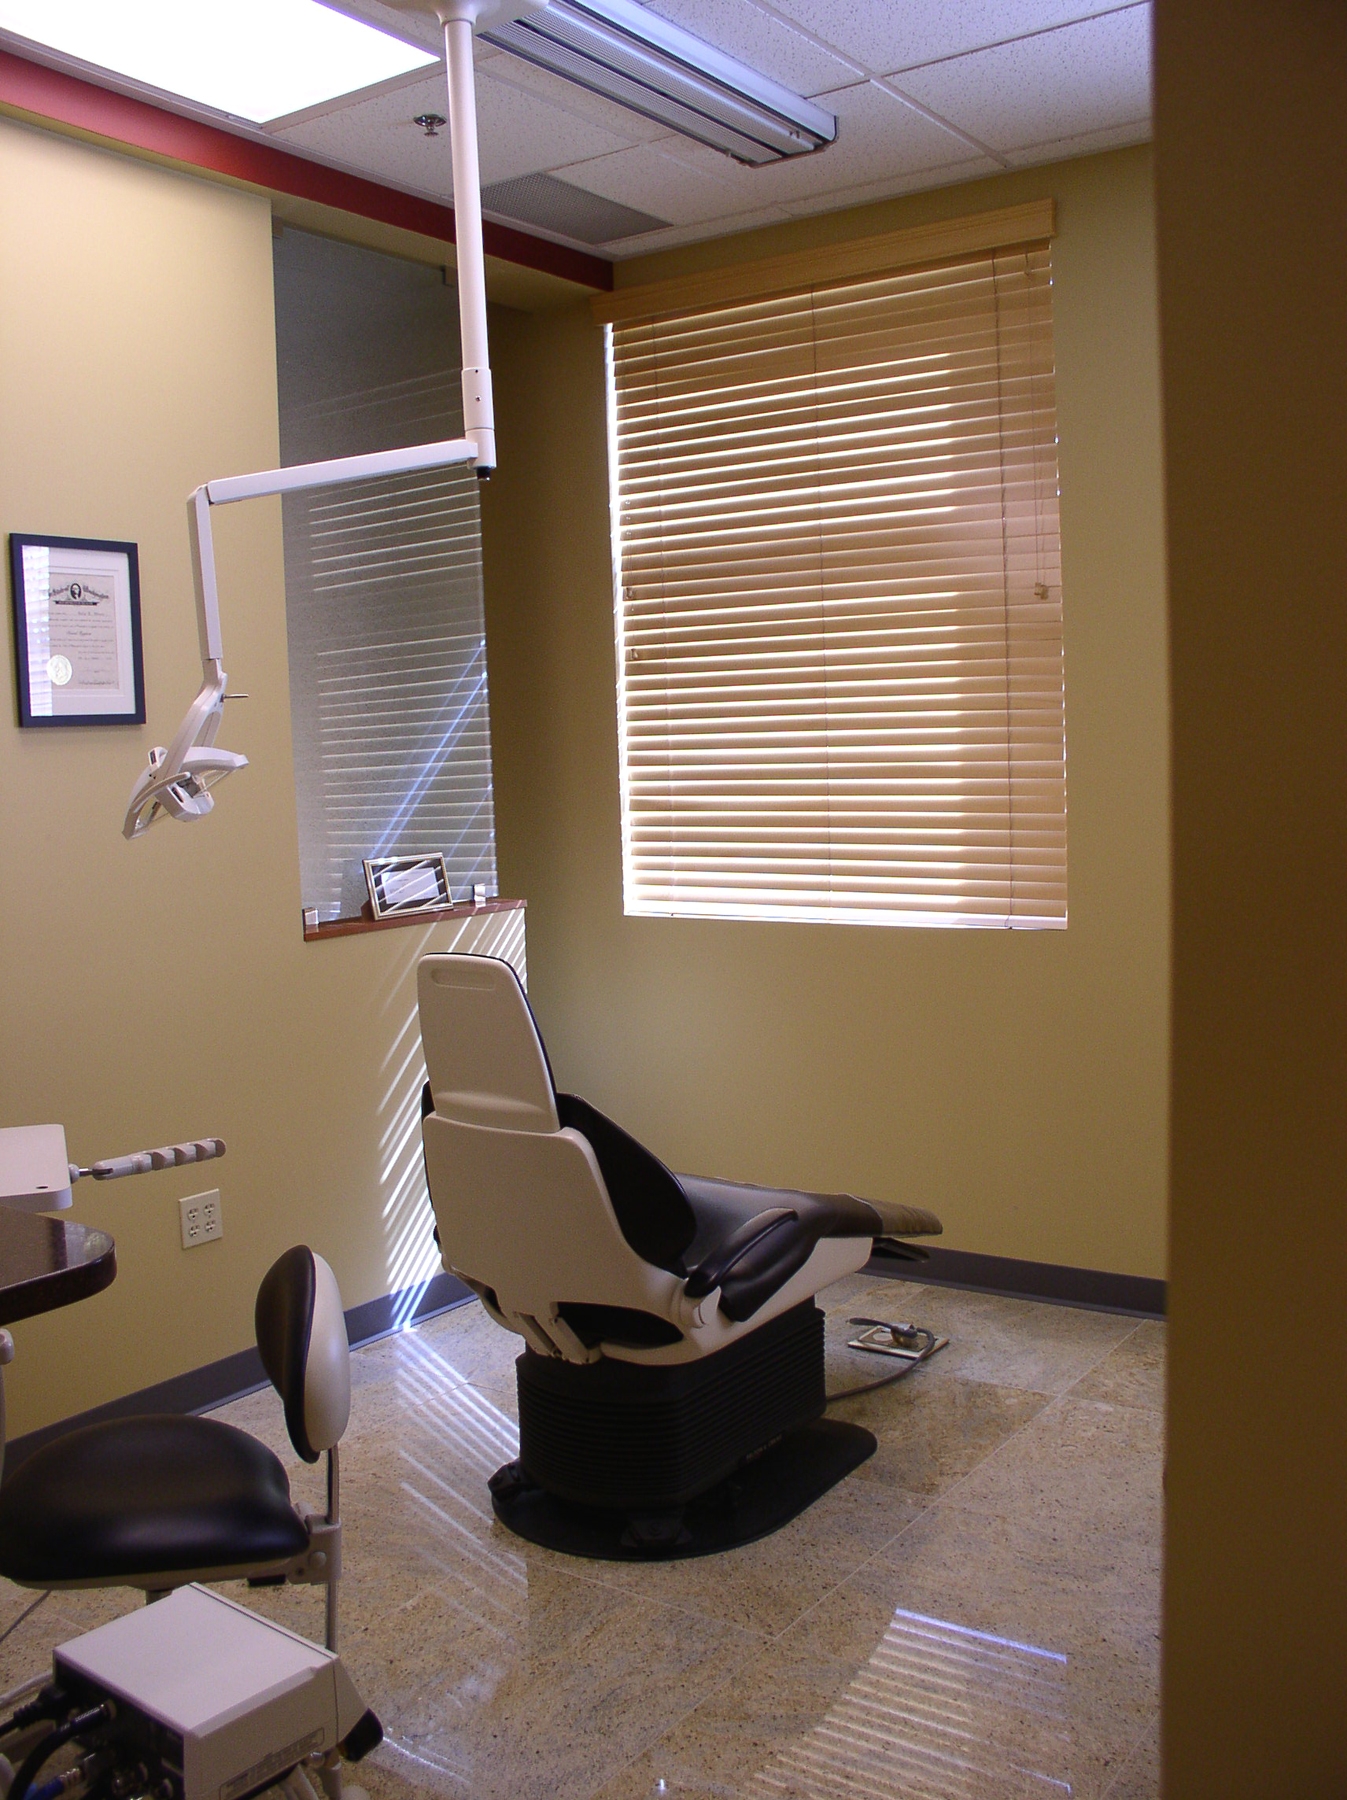 Dr. Echols Exam Room - Sized and Lighter.jpg